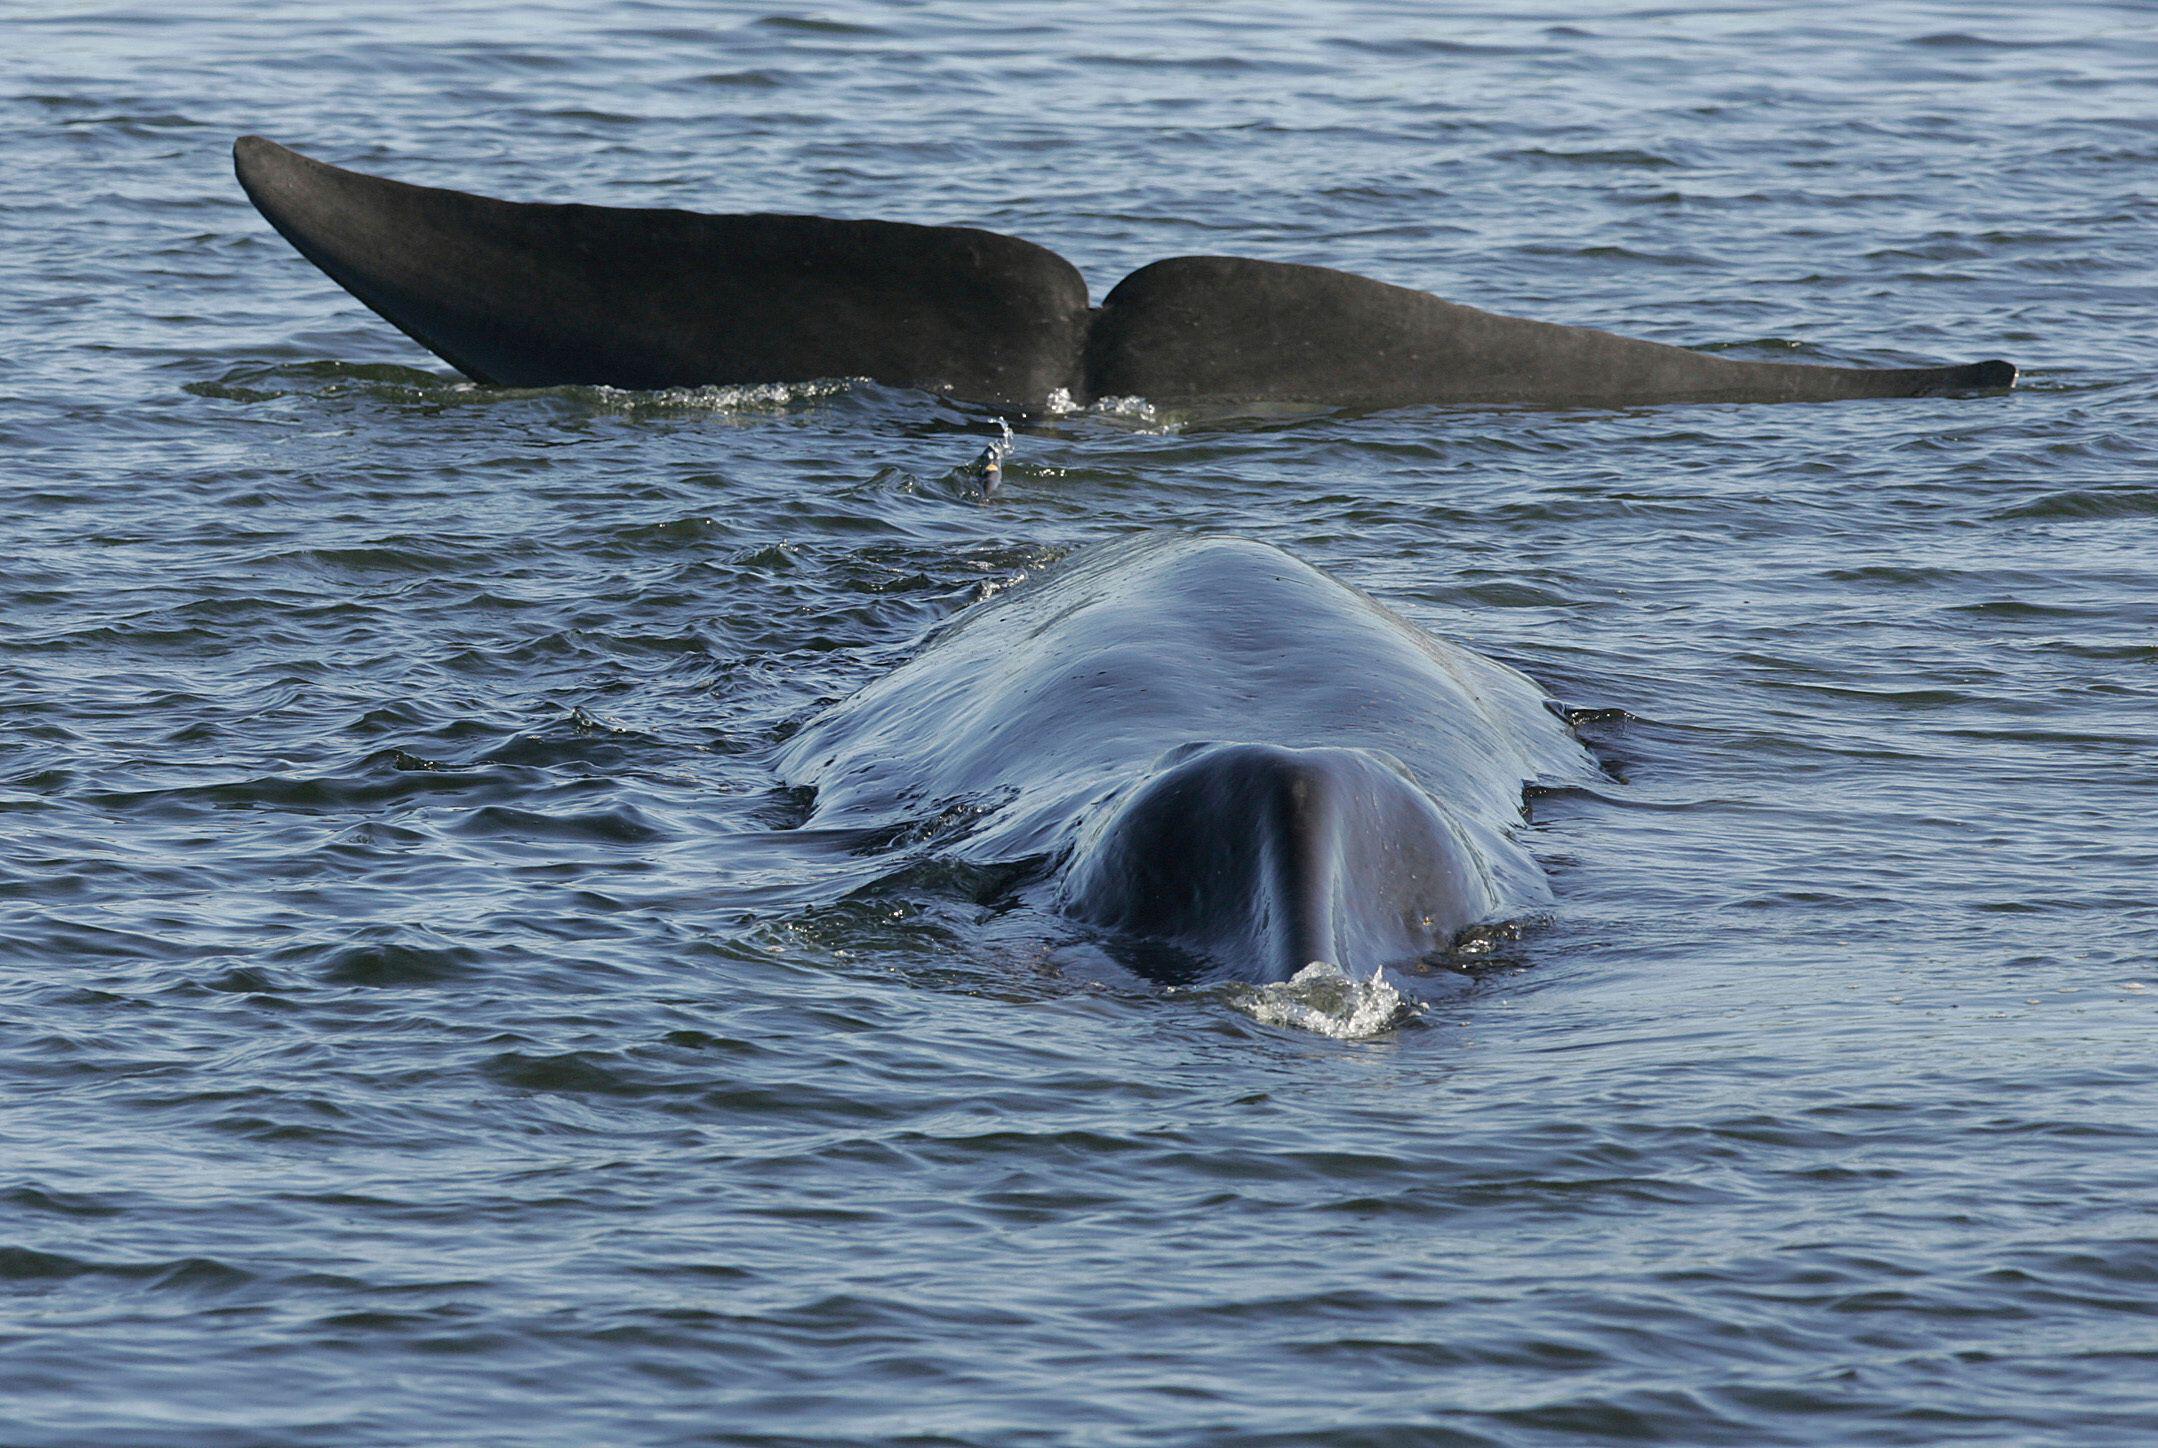 A fin whale in the ocean in Iceland